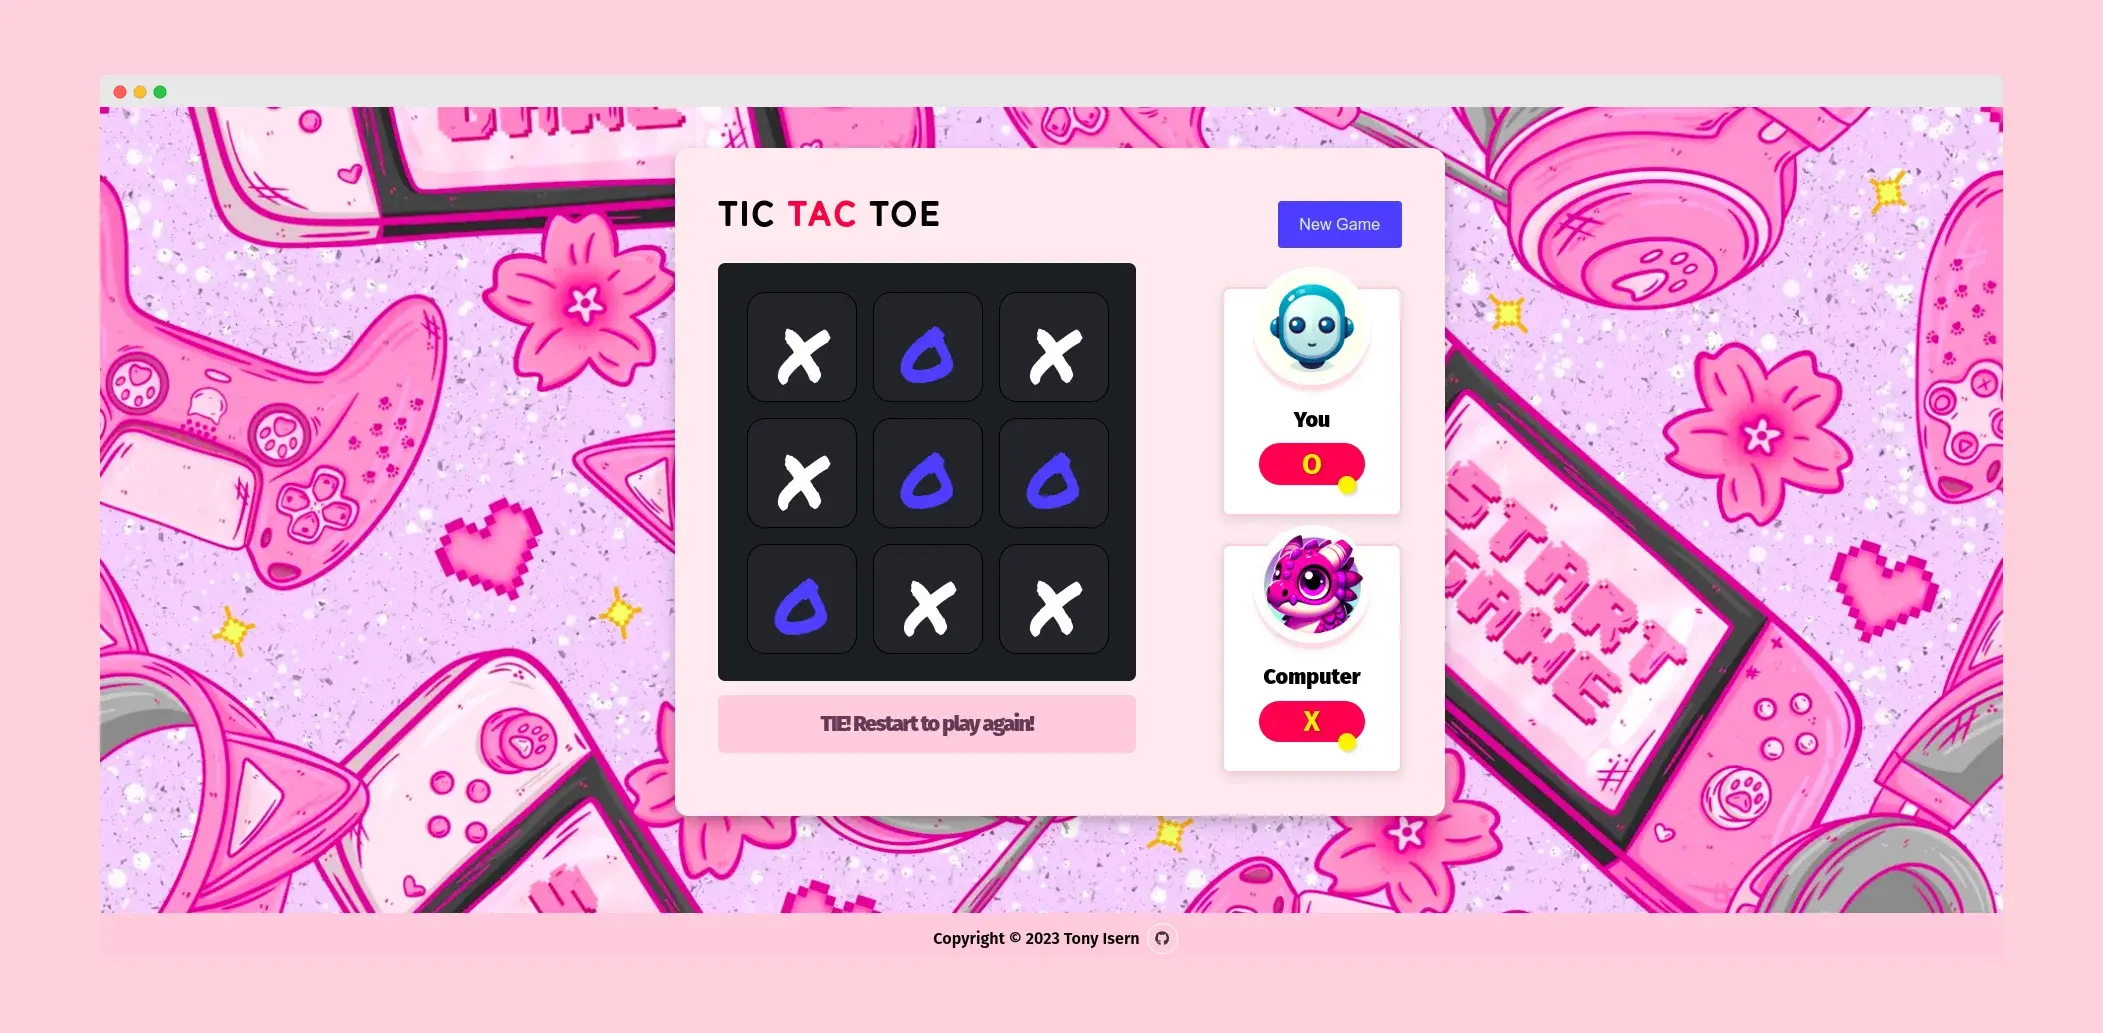 Vibrant Tic Tac Toe web interface set against a pink gaming-themed background. Player avatars and game moves are displayed, with a copyright notice for '2023 Tony Isern'.